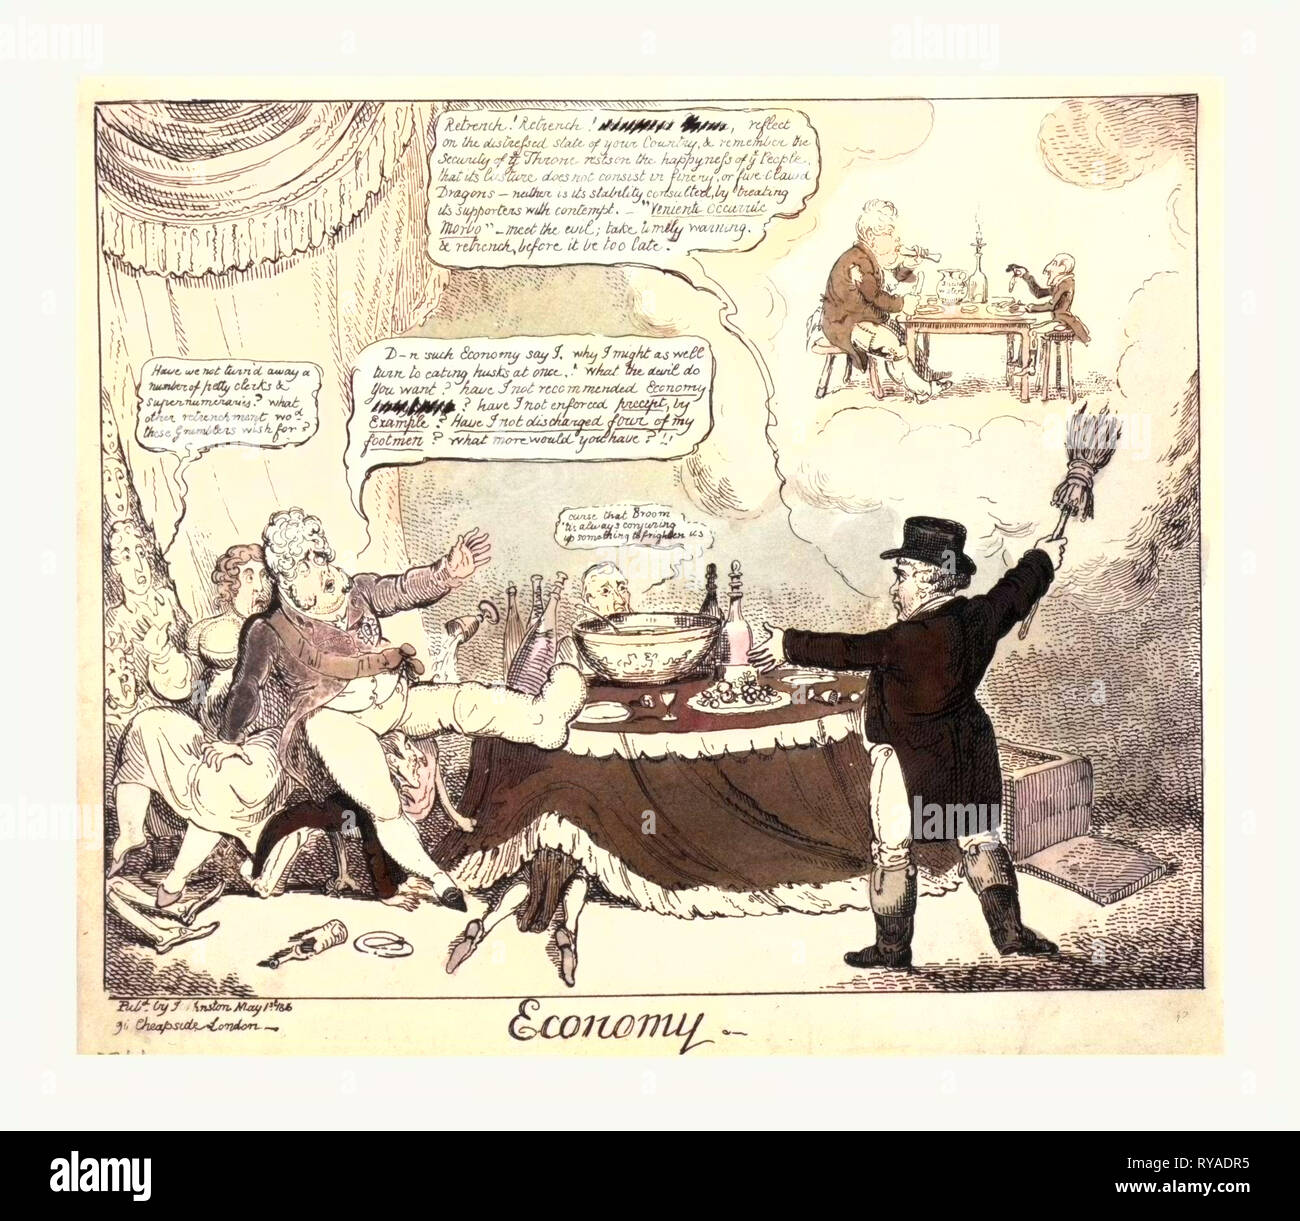 Economy, Cruikshank, George, 1792-1878, Artist, London, Engraving 1816,  Brougham, in the Guise of John Bull, Appears to the Regent, Holding Up a Broom which Points Towards a Small Scene Surrounded by Clouds. The Regent, Who Has Been Revelling Over a Large Bowl of Punch, Falls Back Terrified, Overturning His Chair. Brougham, Arm Extended Towards the Regent, Declaims: Retrench, Retrench, Reflect on the Distressed State of Your Country. The Regent Falls on to Mahon, a Tiny Figure on Hands and Knees, Gazing Up at Brougham, He Supports Himself with His Right Hand on the Knee of Lady Hertford. Stock Photo